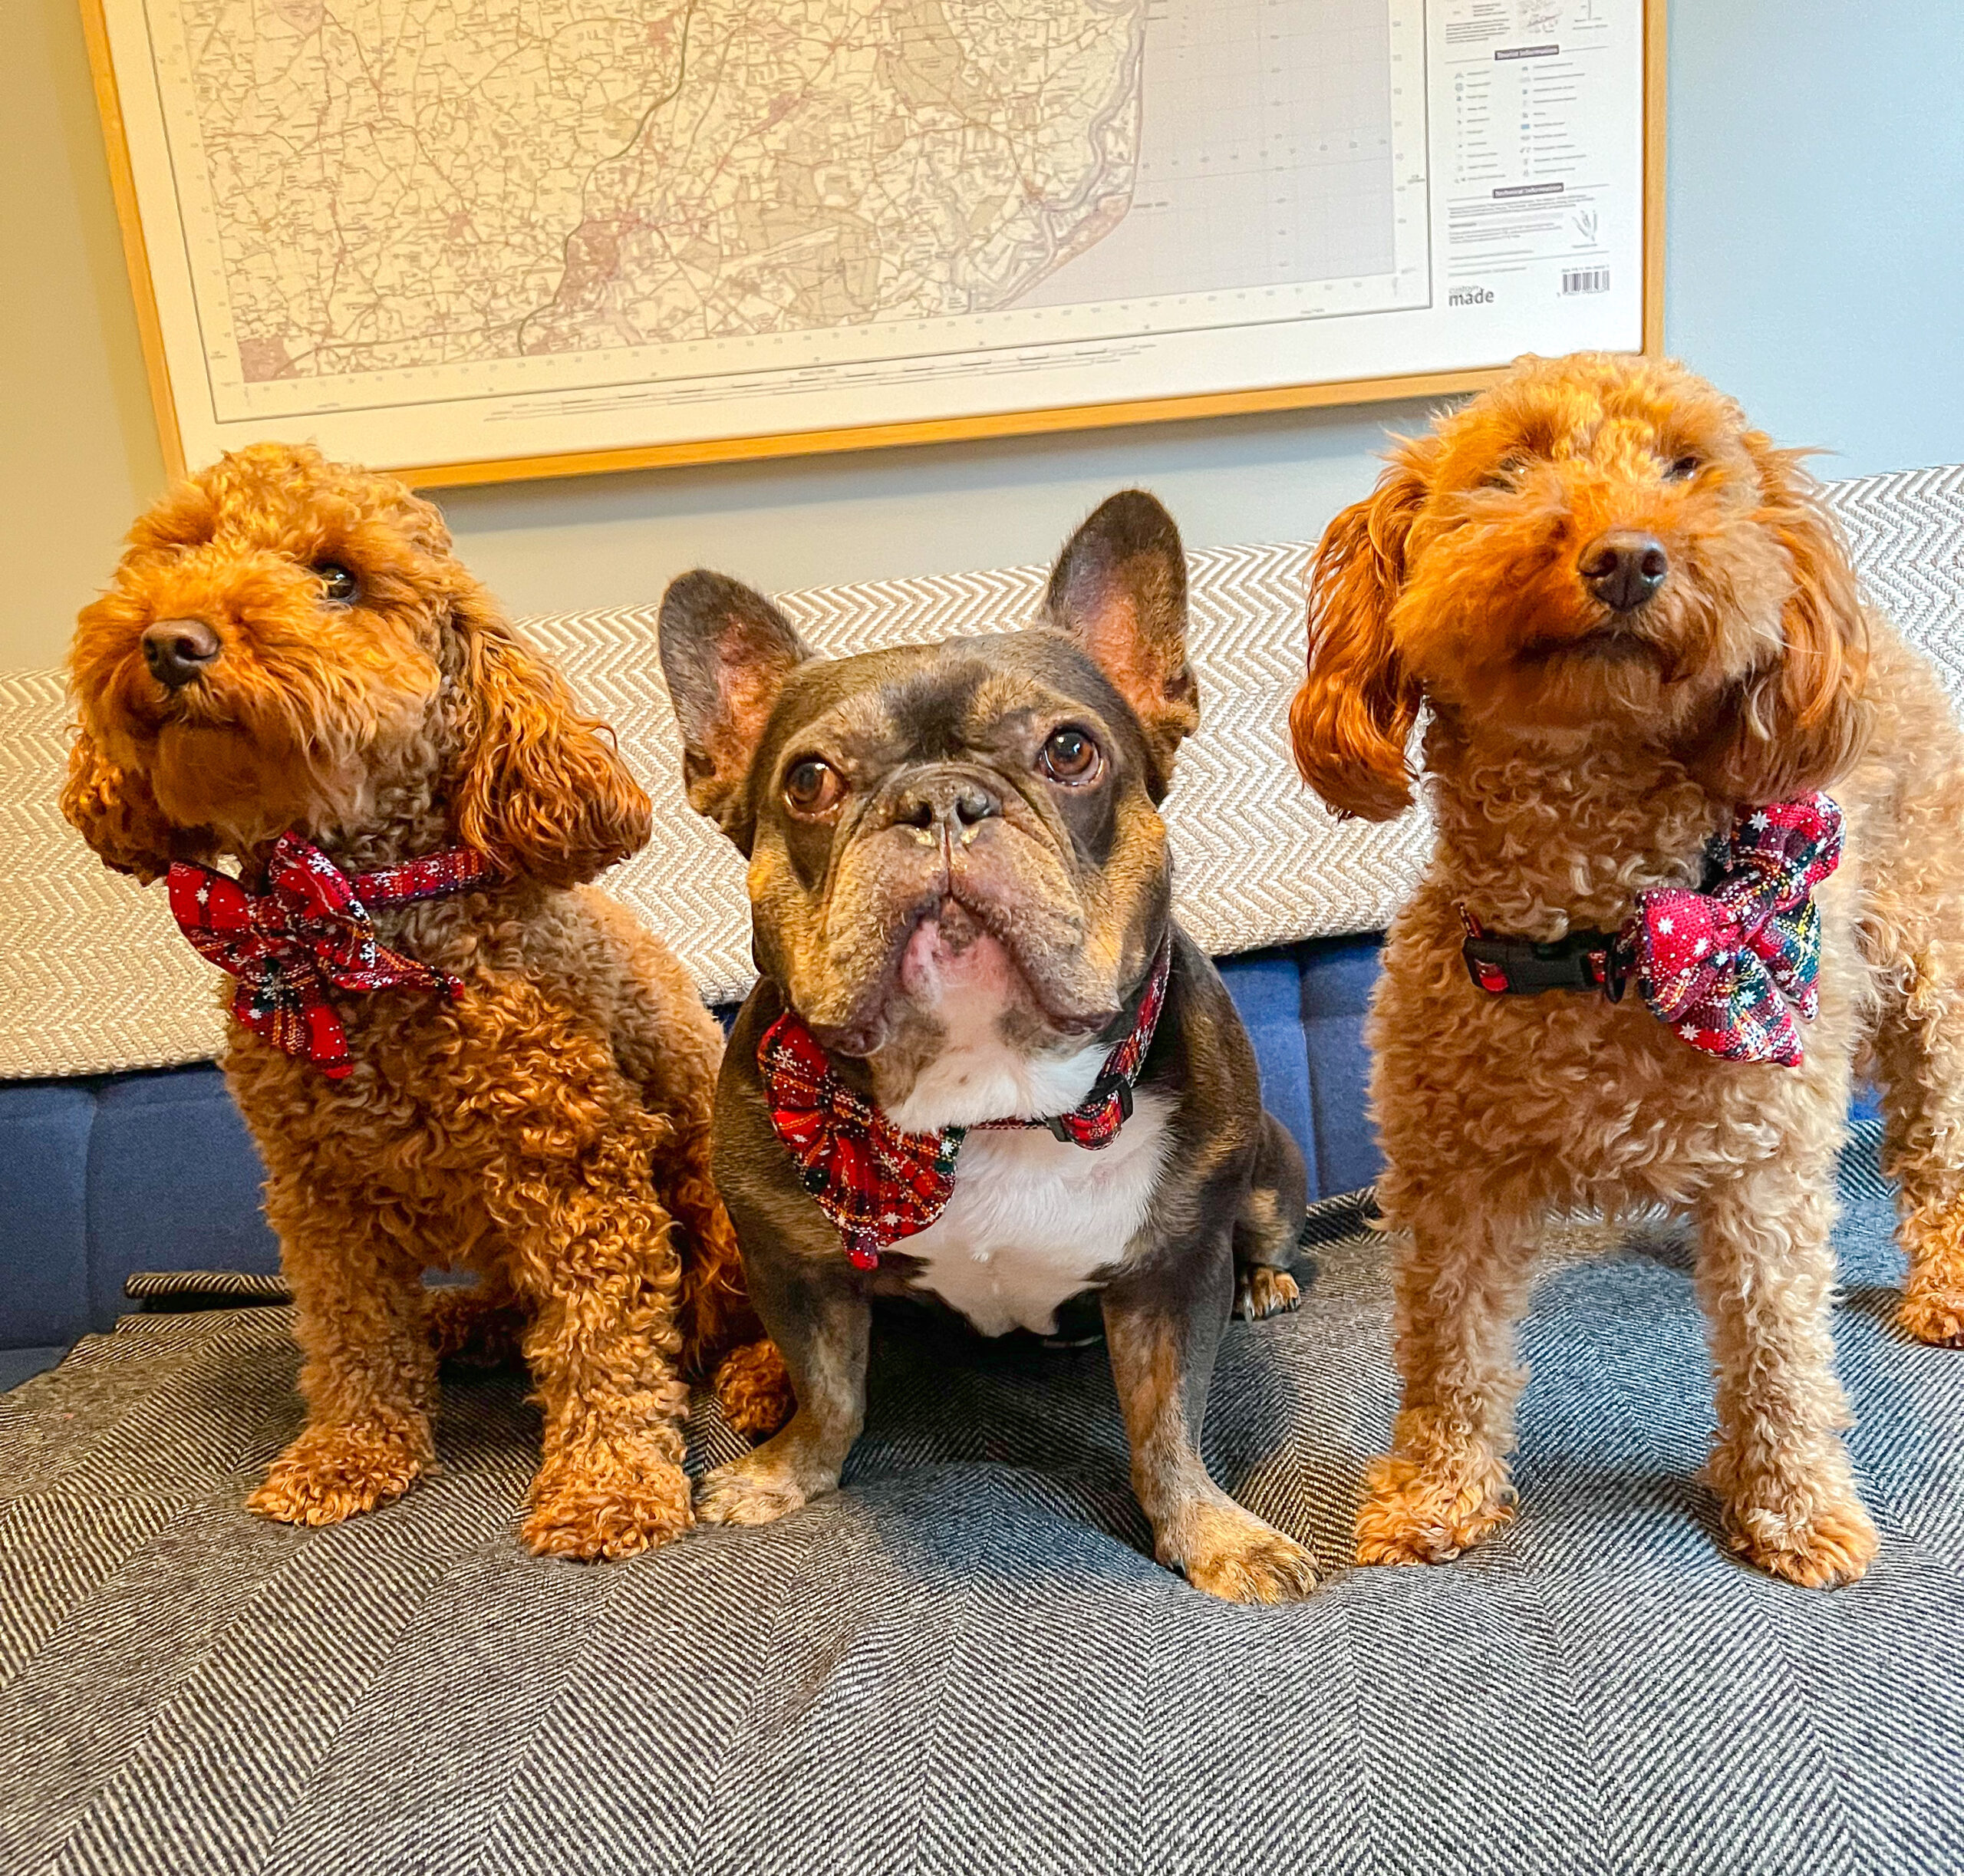 Two poodles and a french bulldog wearing red christmas themed collars with matching bows, sat on a grey sofa together looking at the camera. They look ready for their Christmas dog events that they have planned.